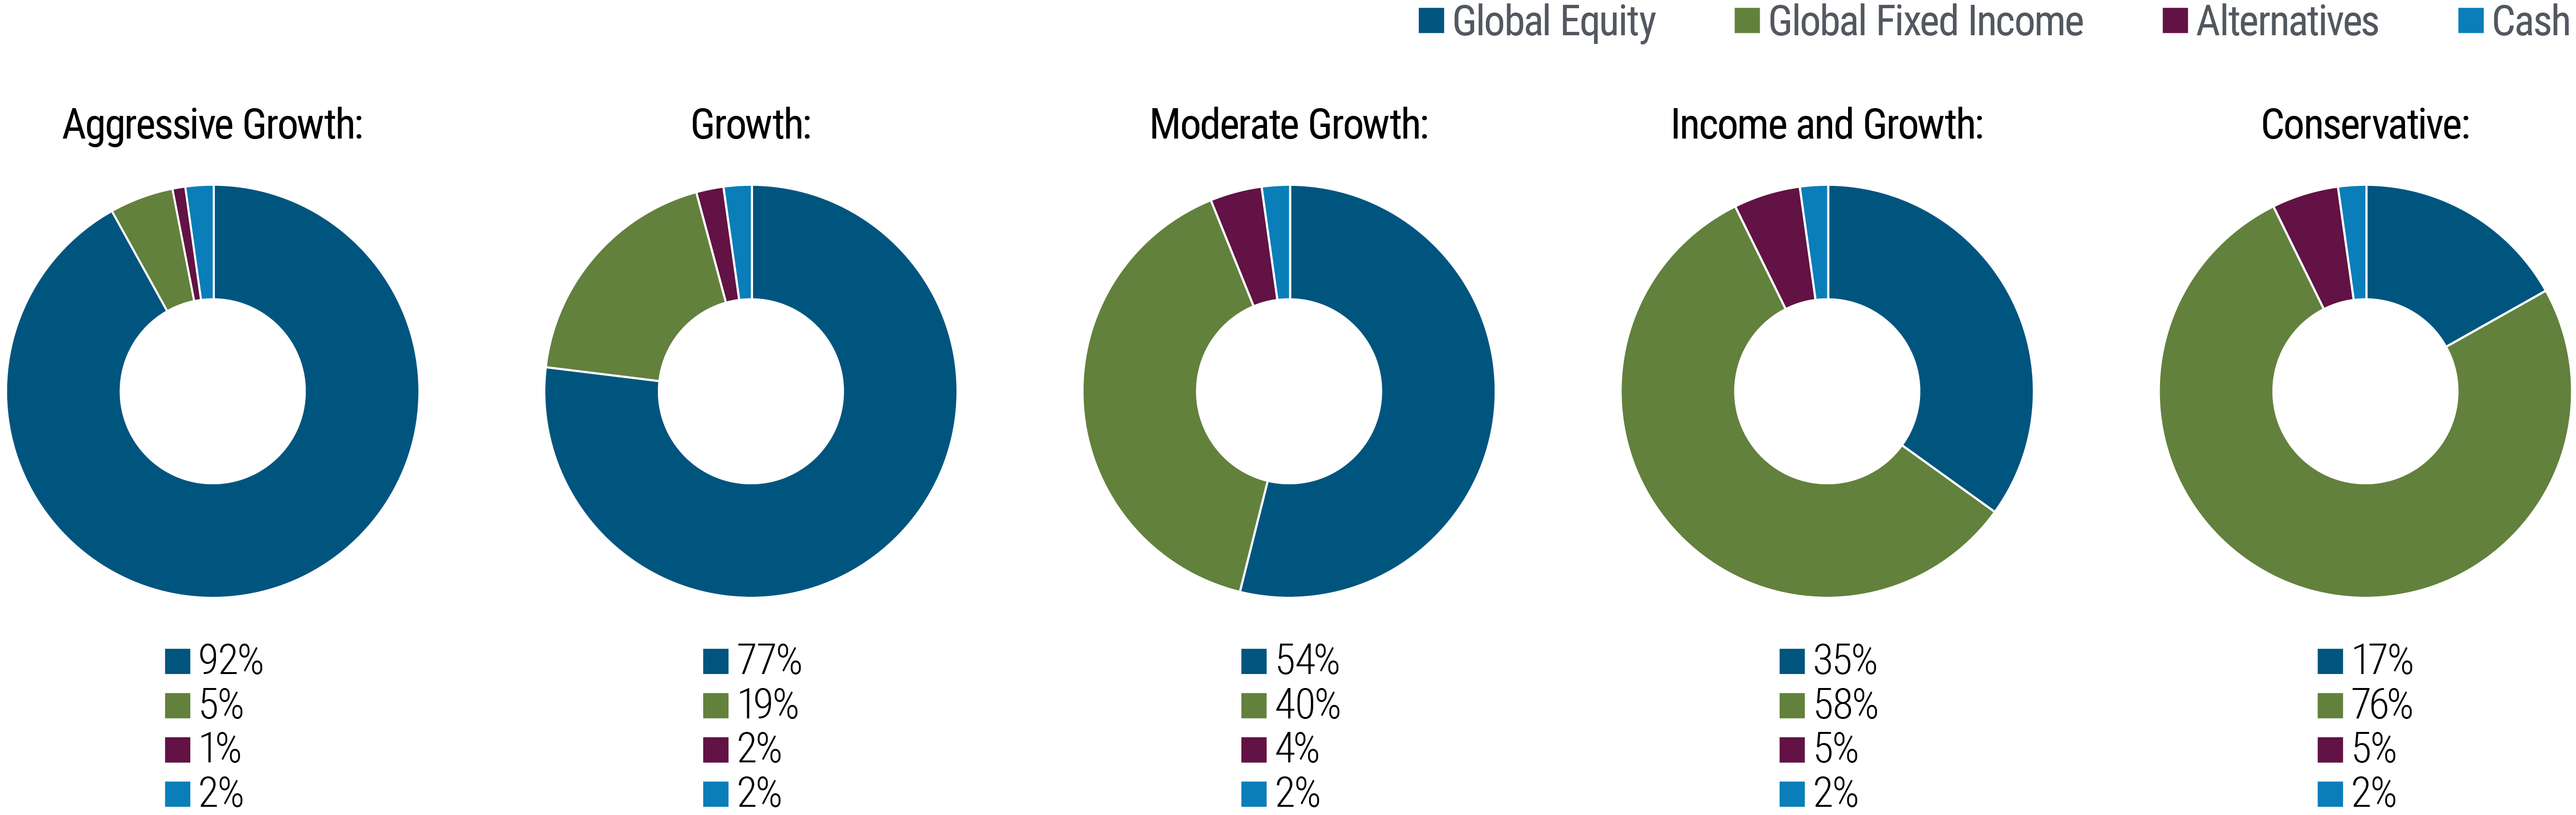 The figure shows five pie charts side by side, with each one representing a portfolio with varying asset allocations, with blue representing global equity, green depicting global fixed income, dark red showing alternatives, and royal blue representing cash. On the left, the first chart presents aggressive growth, with a 92% allocation to global equities, 5% to fixed income, 2% to cash, and 1% to alternatives. Moving right to more conservative portfolios, the biggest changes amount to the proportions of equities and bonds. For a growth portfolio, the allocation is 77% in equities, 19% in bonds, 2% in cash and 2% in alternatives. Further to the right, the moderate growth portfolio and income and growth portfolios show decreasing allocations to equities and increasing ones to bonds. On the far right, the conservative portfolio shows an allocation of 17% to equities, 76% to bonds, 5% to alternatives, and 2% to cash. 